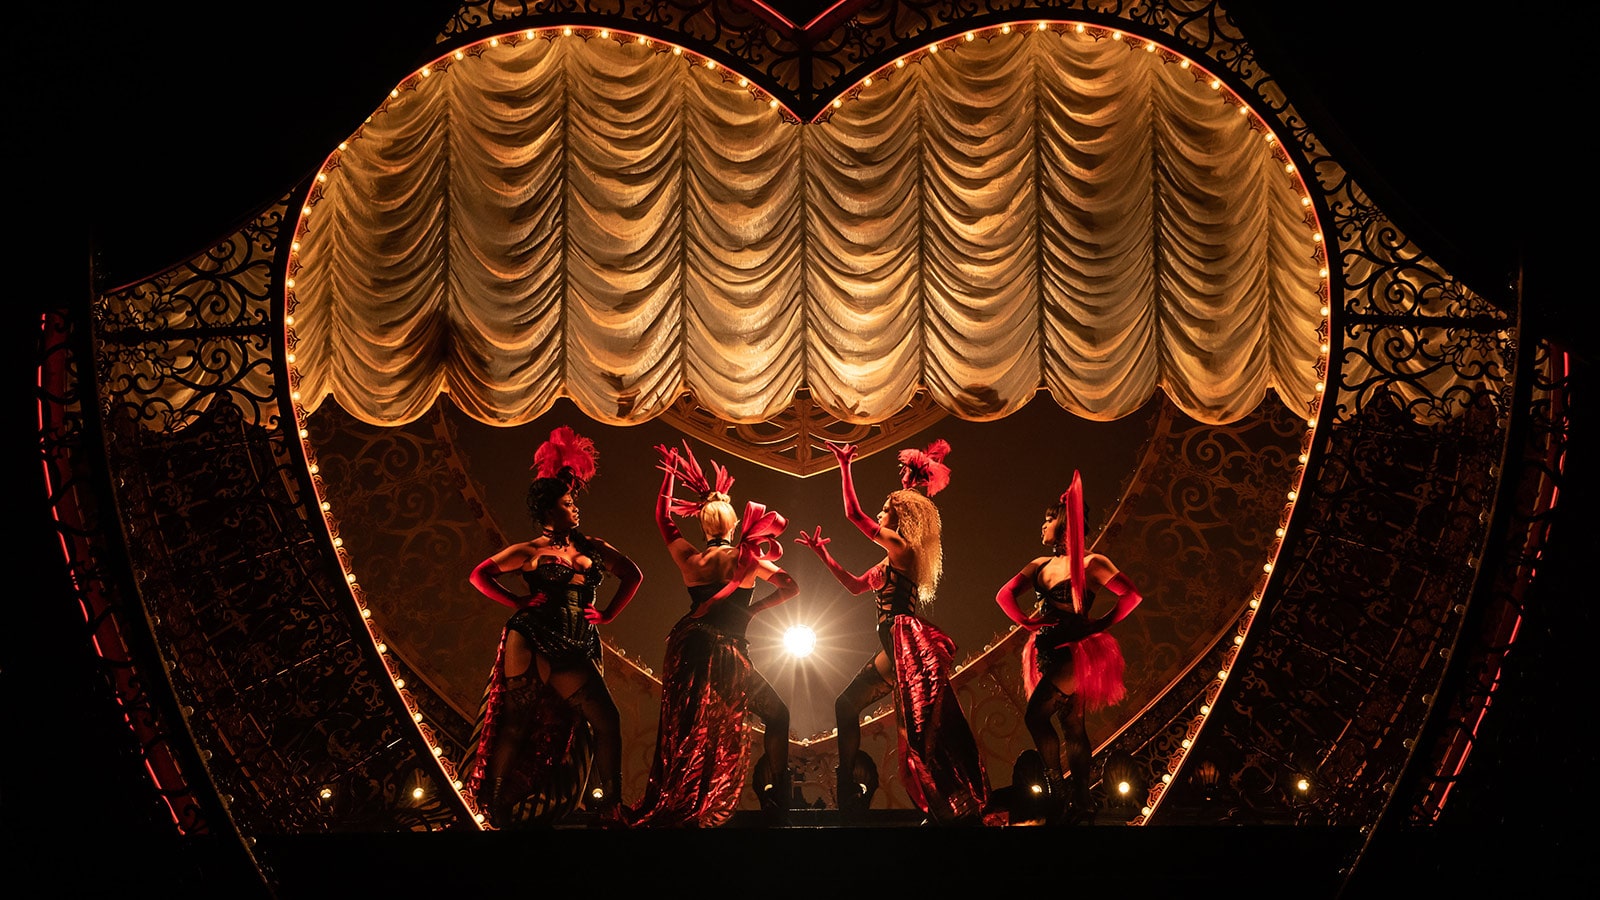 (L-R) Jacqueline B. Arnold as La Chocolat, Robyn Hurder as Nini, Holly James as Arabia and Jeigh Madjus as Baby Doll in <em>Moulin Rouge! The Musical</em>